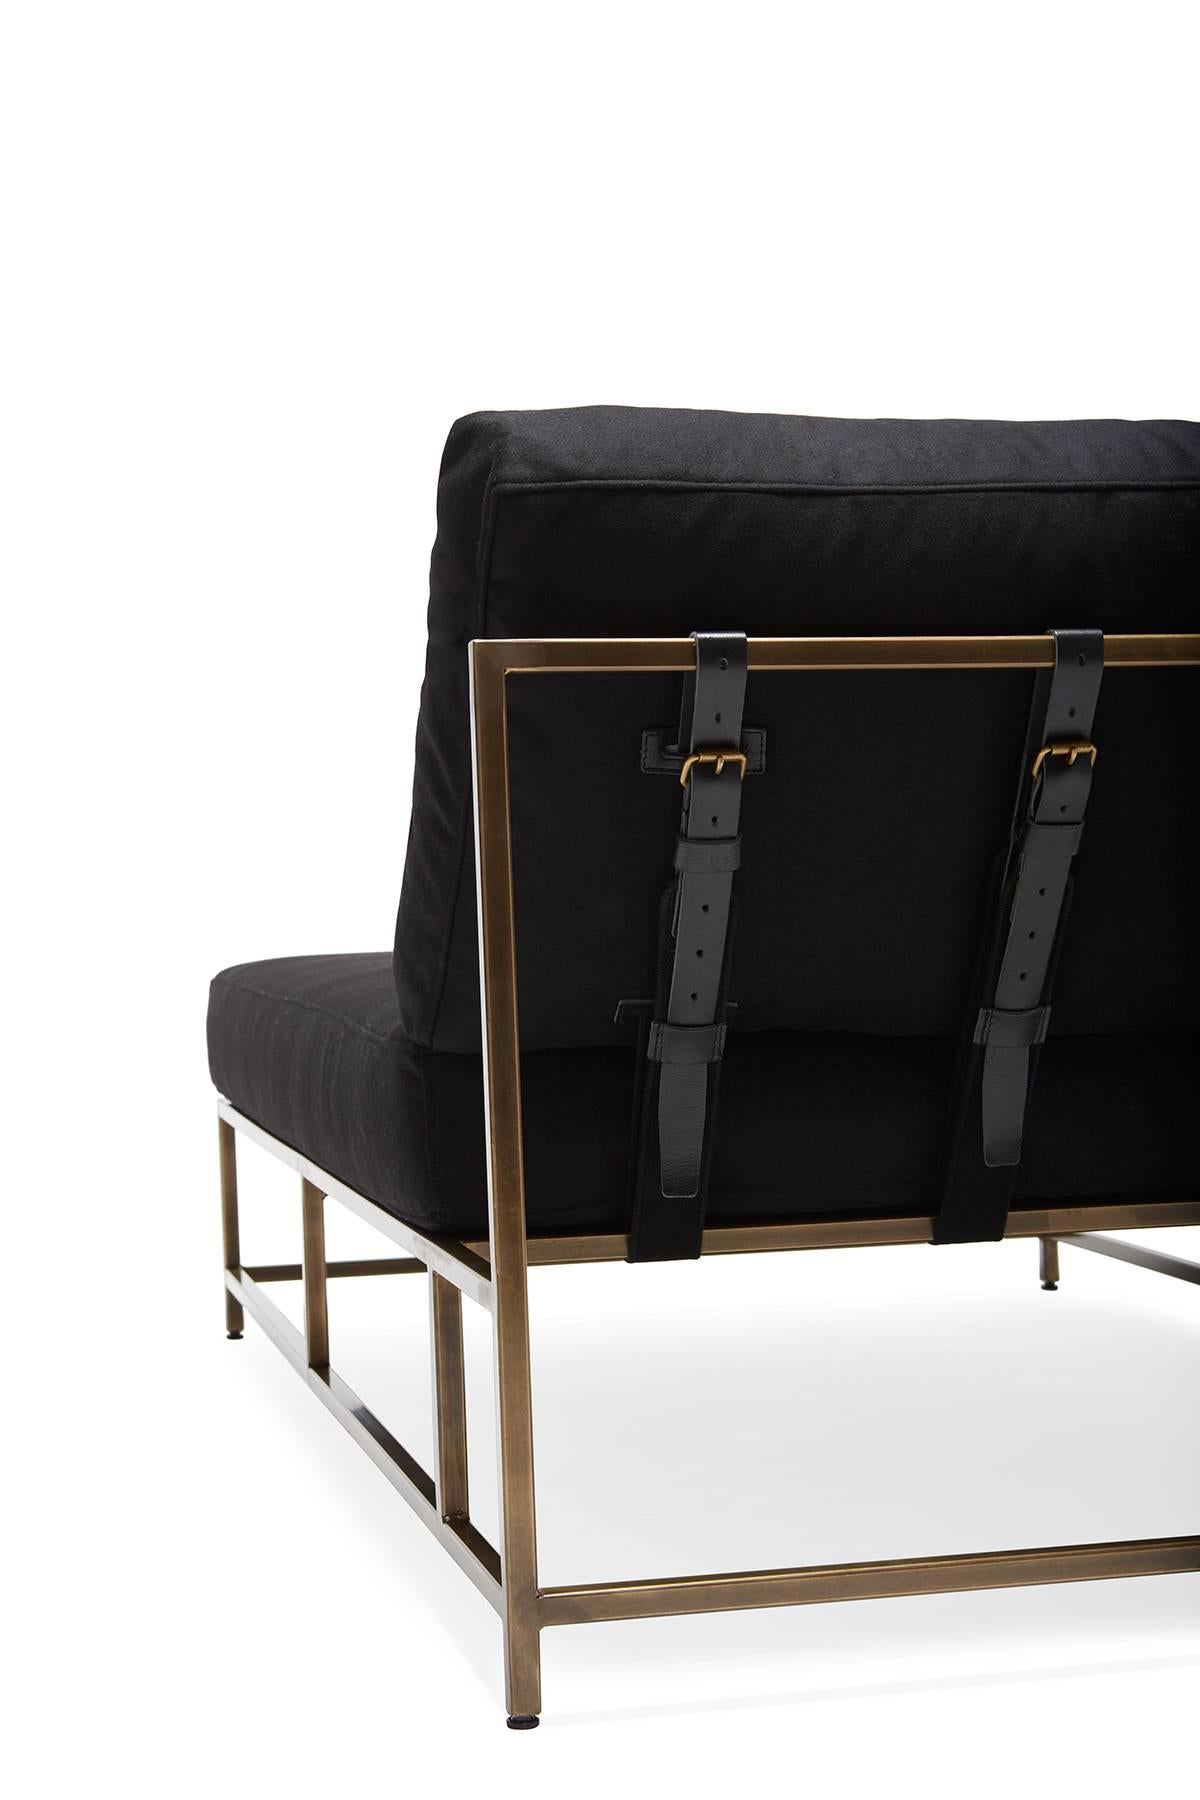 Plated Black Wool and Antique Brass Chaise Lounge For Sale